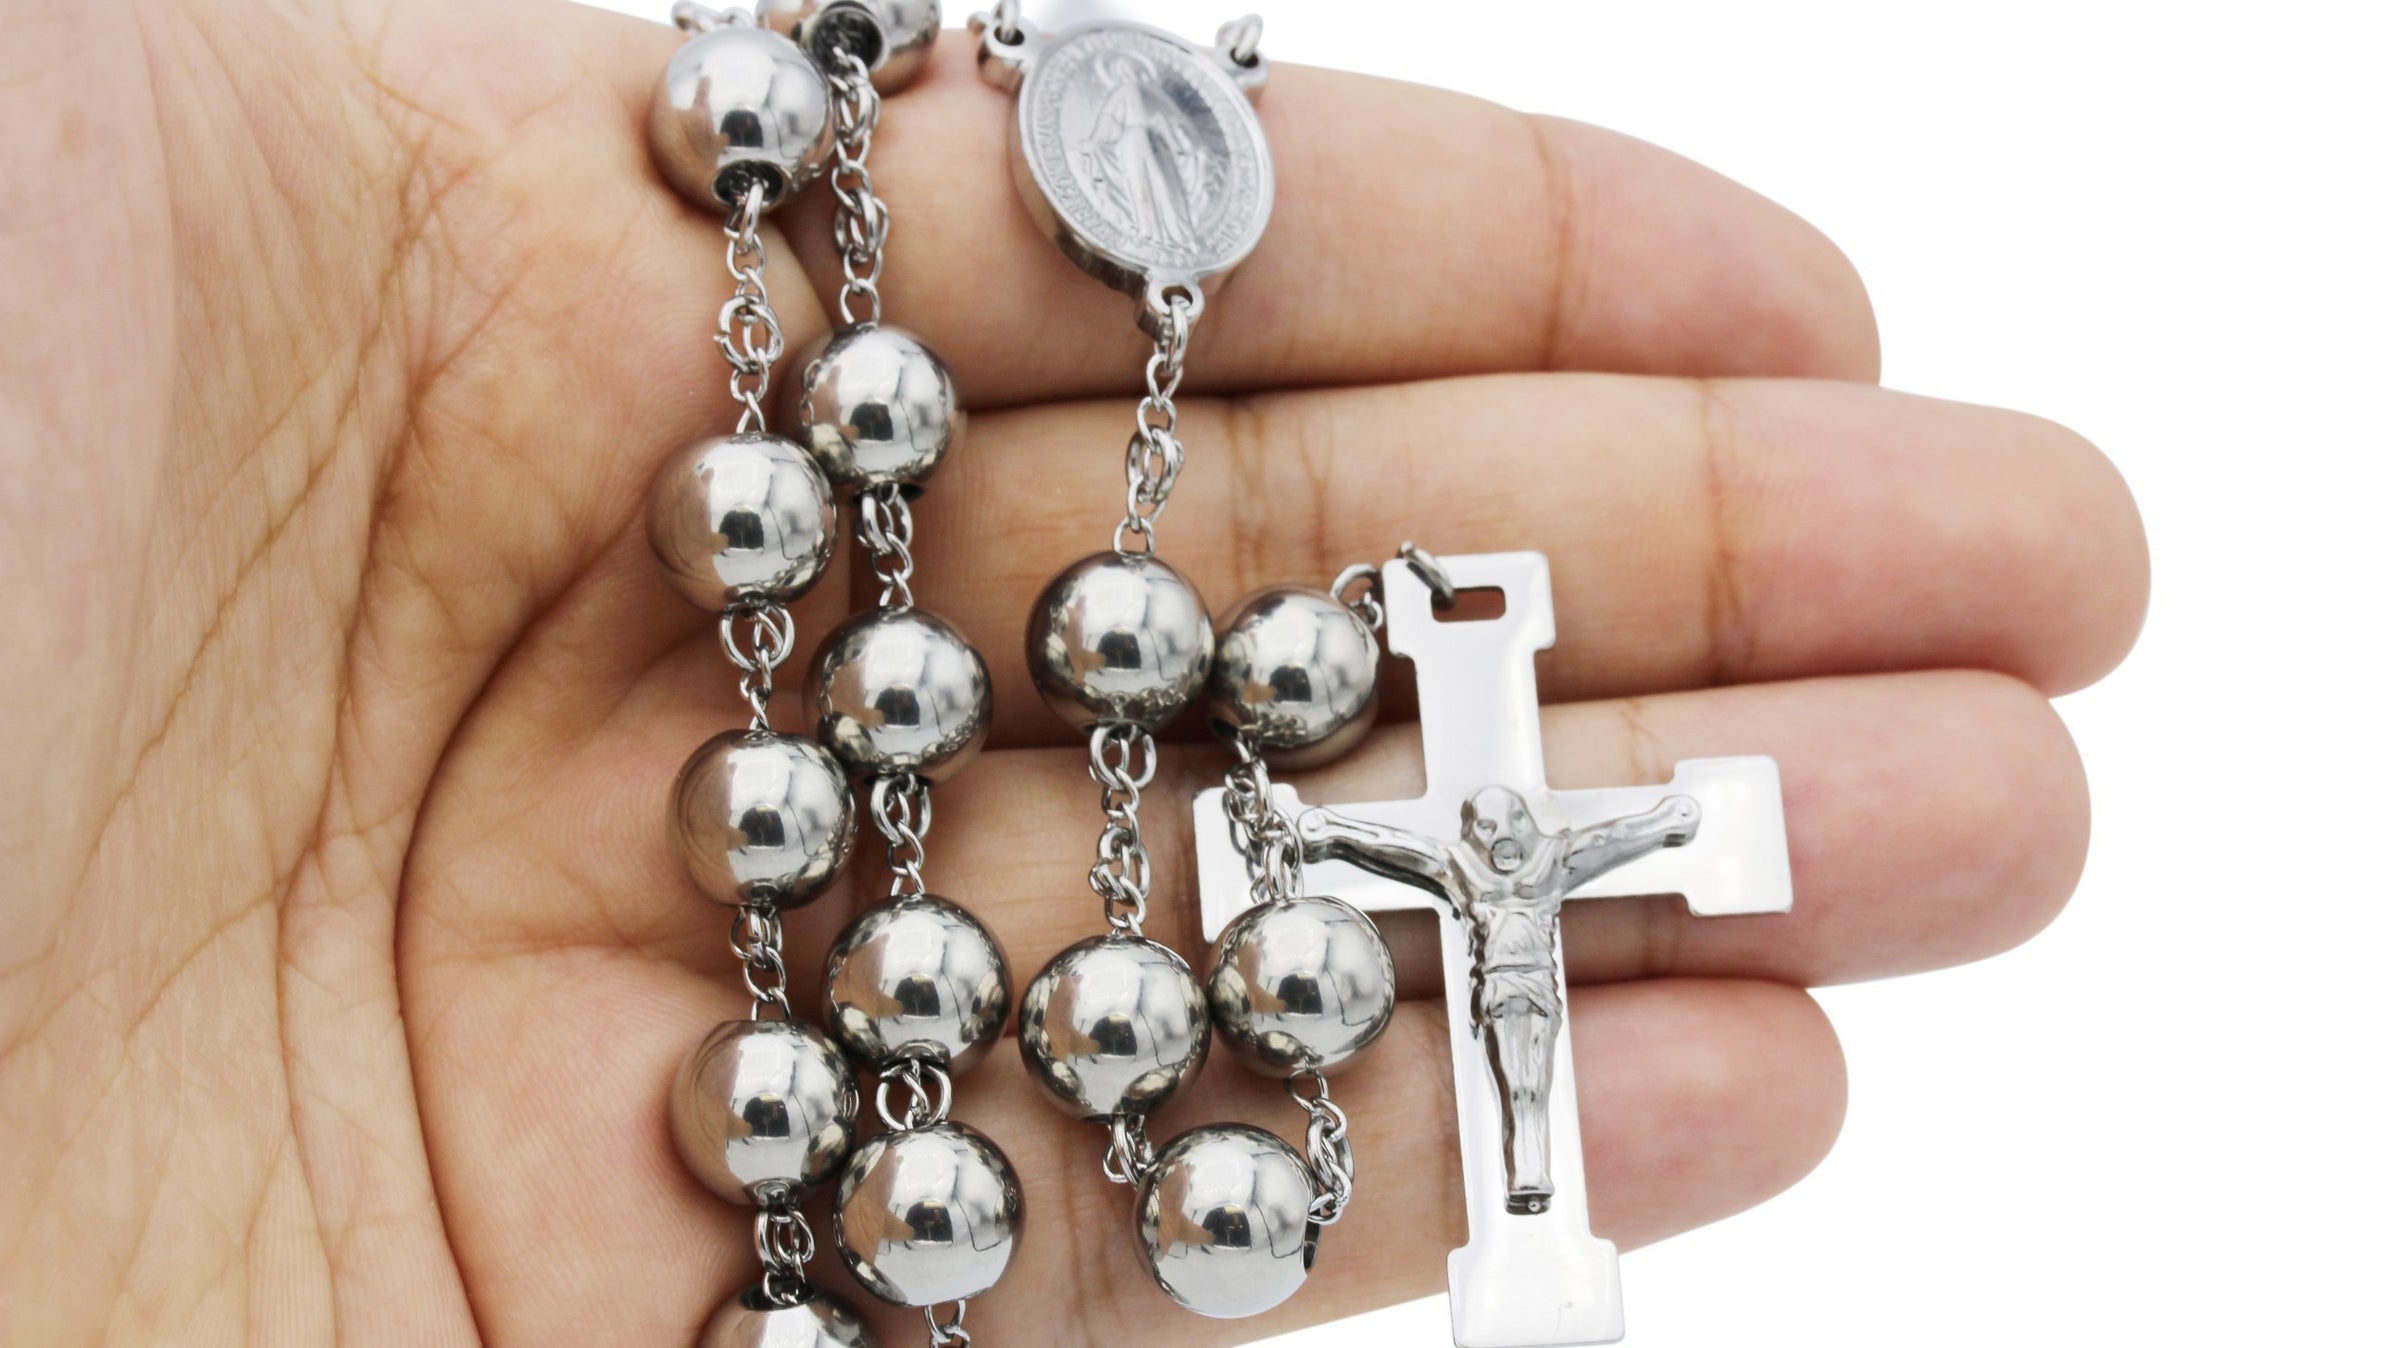 High Quality Stainless Steel & Gold Rosary Necklace - Strength In Faith